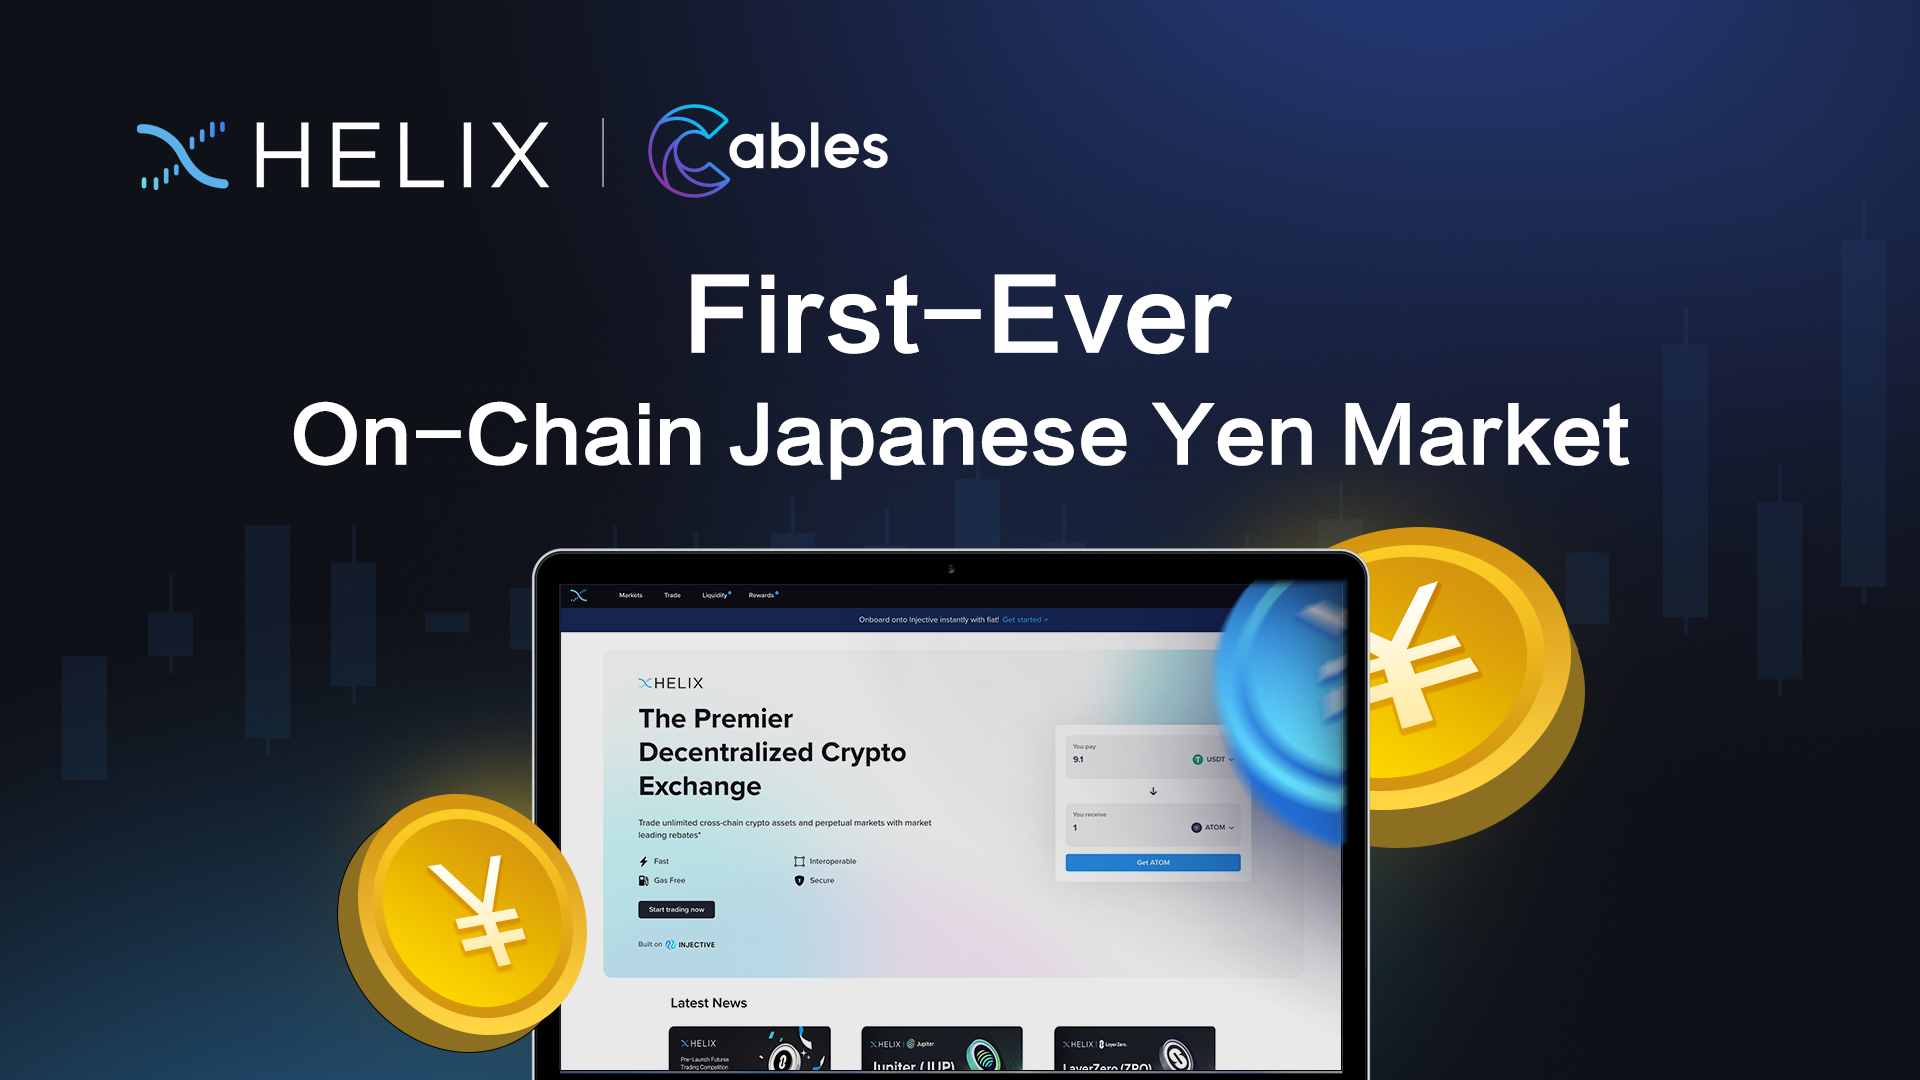 Helix Launches the First-Ever On-Chain Japanese Yen (JPY) Market